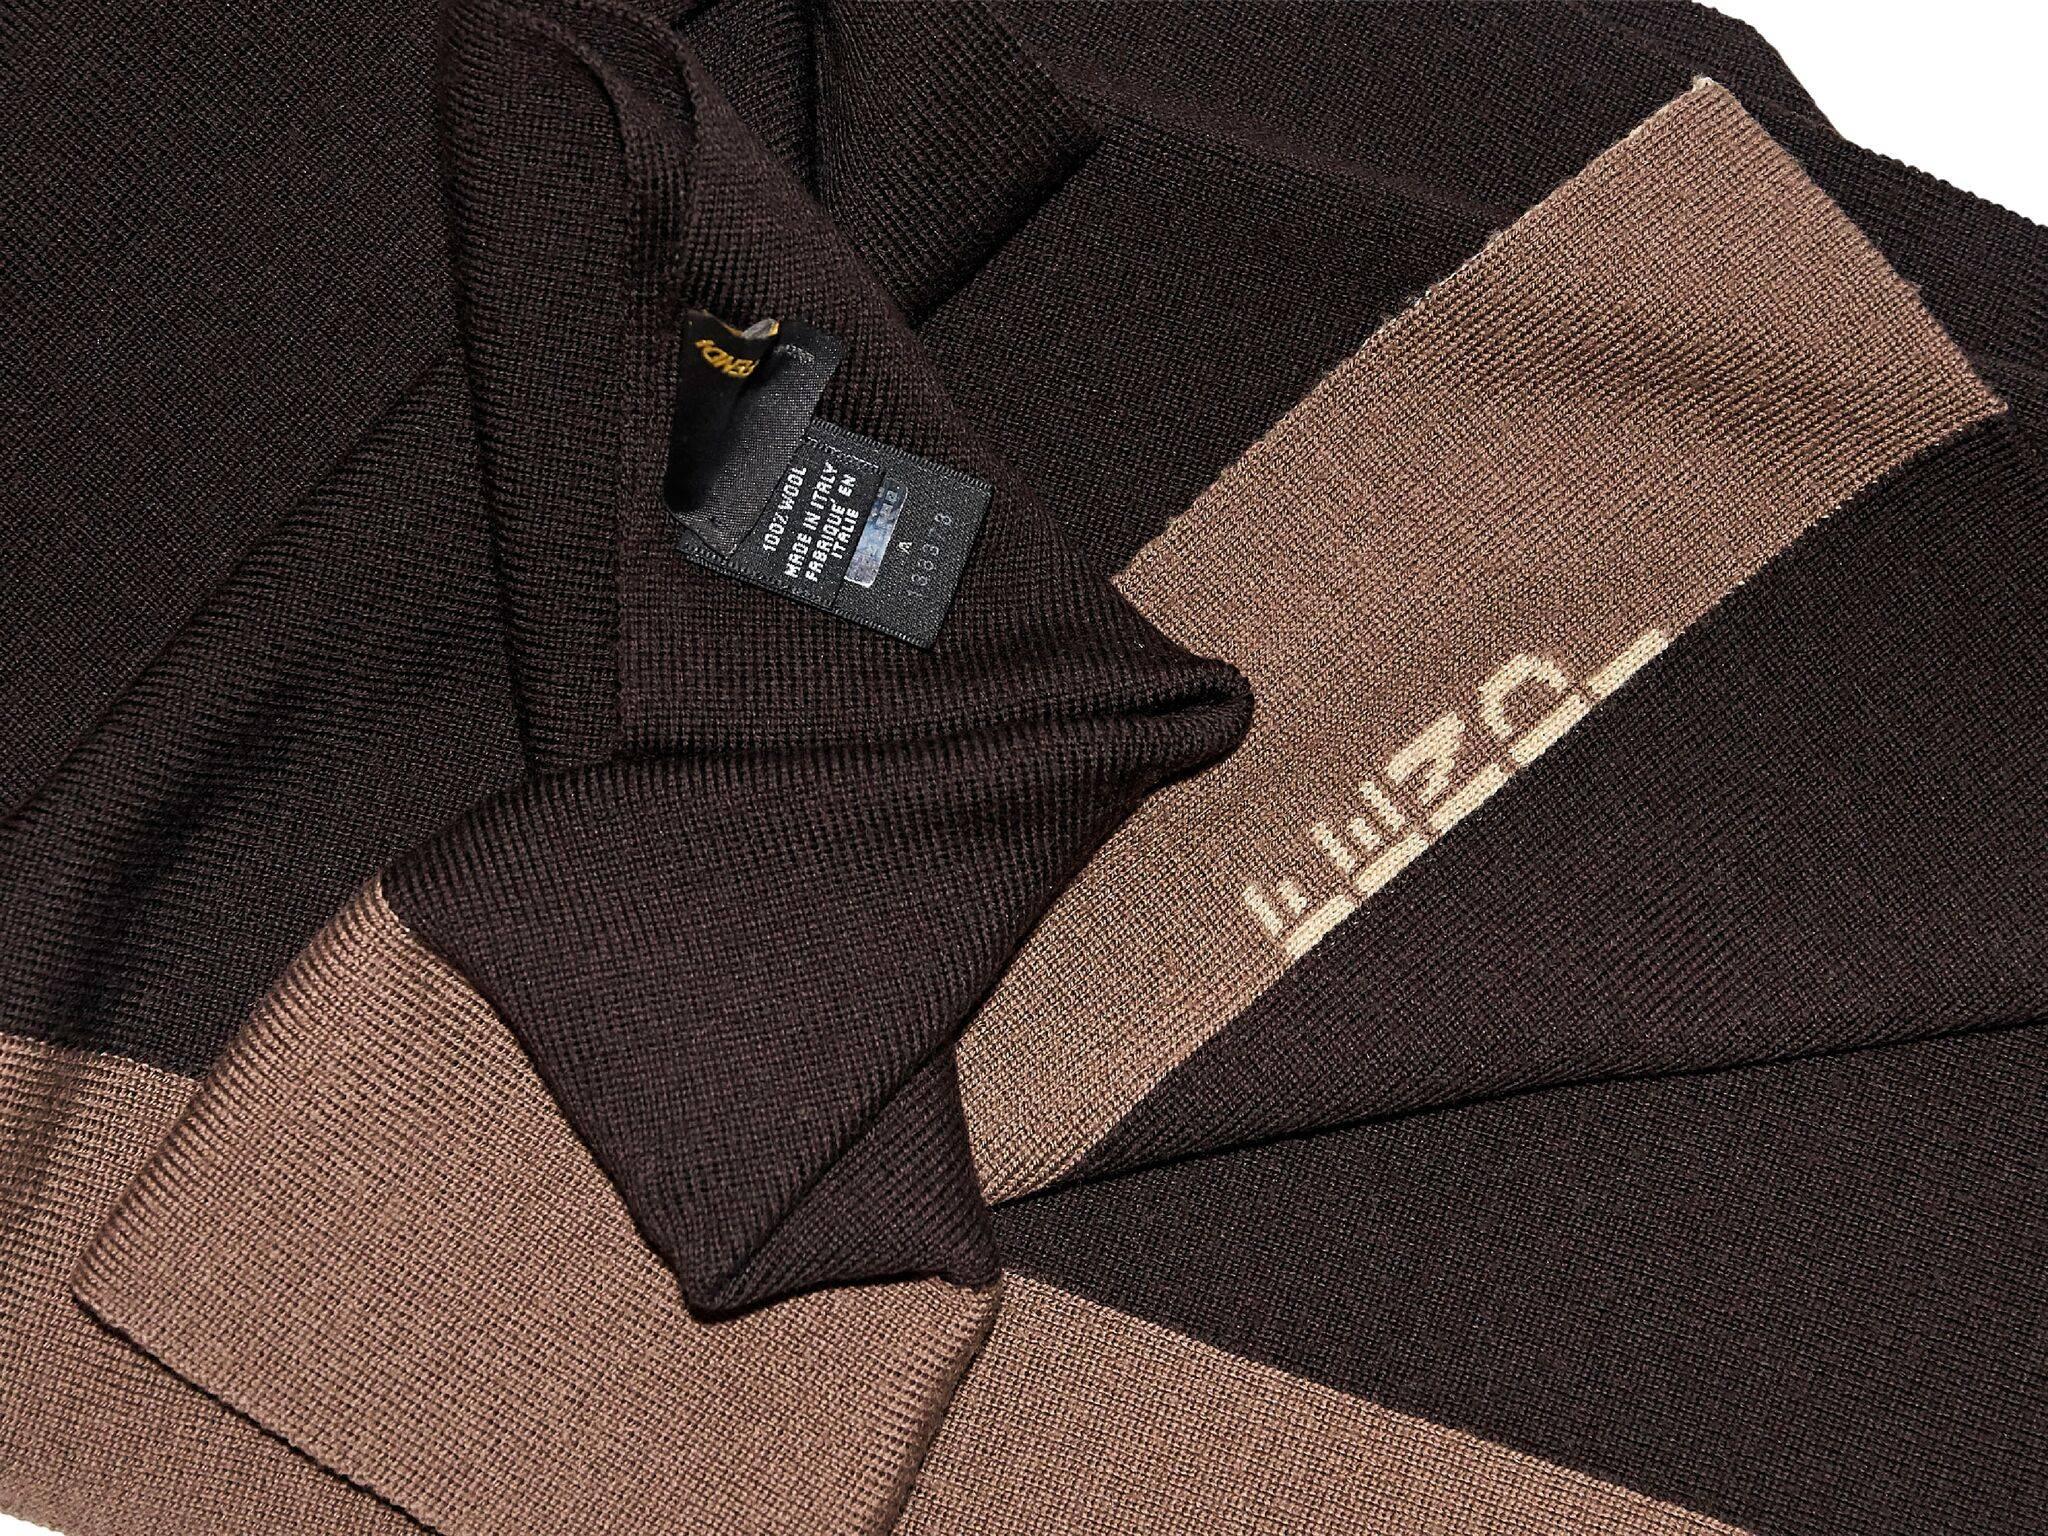 Product details:  Tonal brown wool scarf by Fendi.  63